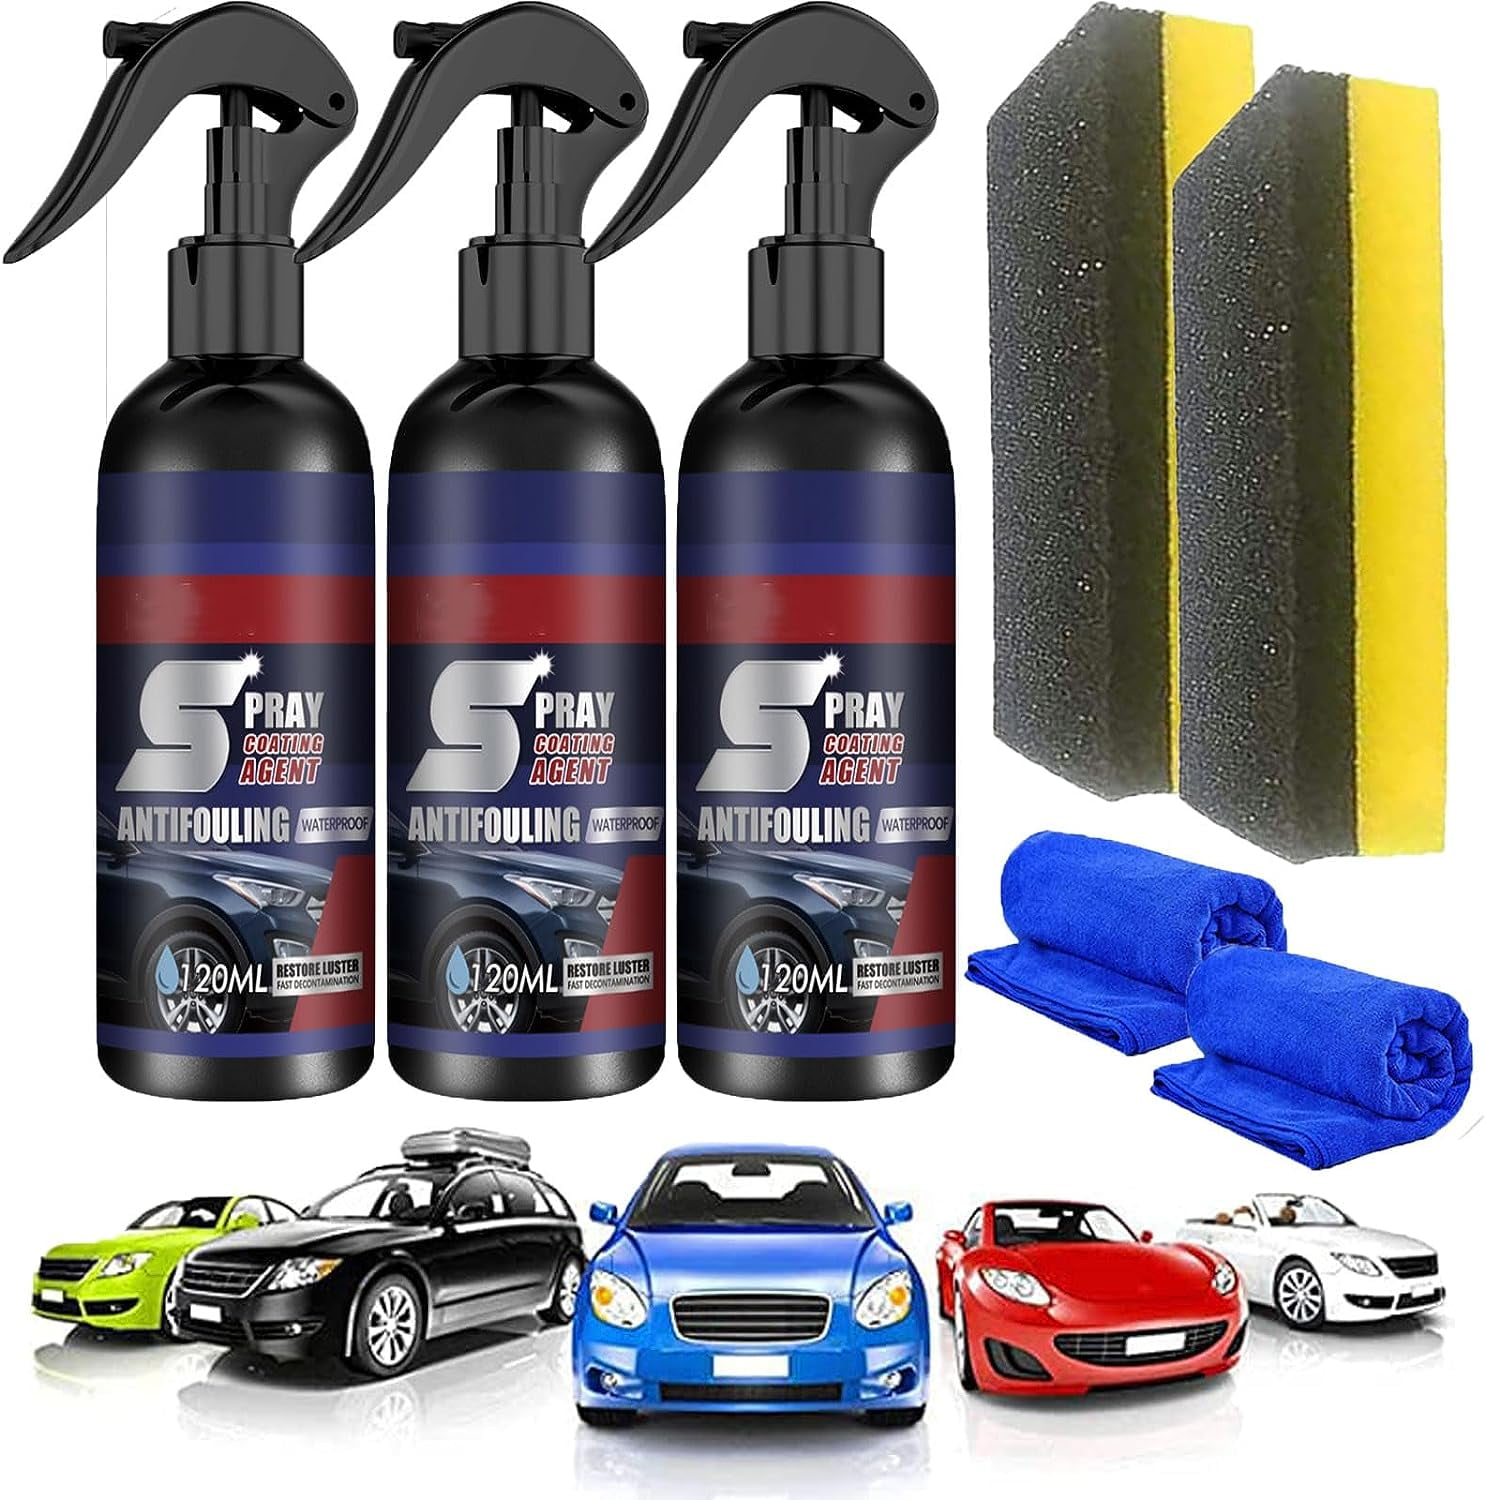 3 Set) Multi-Functional Coating Renewal Agent, 3 in 1 Ceramic Car Coating  Spray High Protection, Plastic Parts Refurbish Agent,Suitable for all cars  